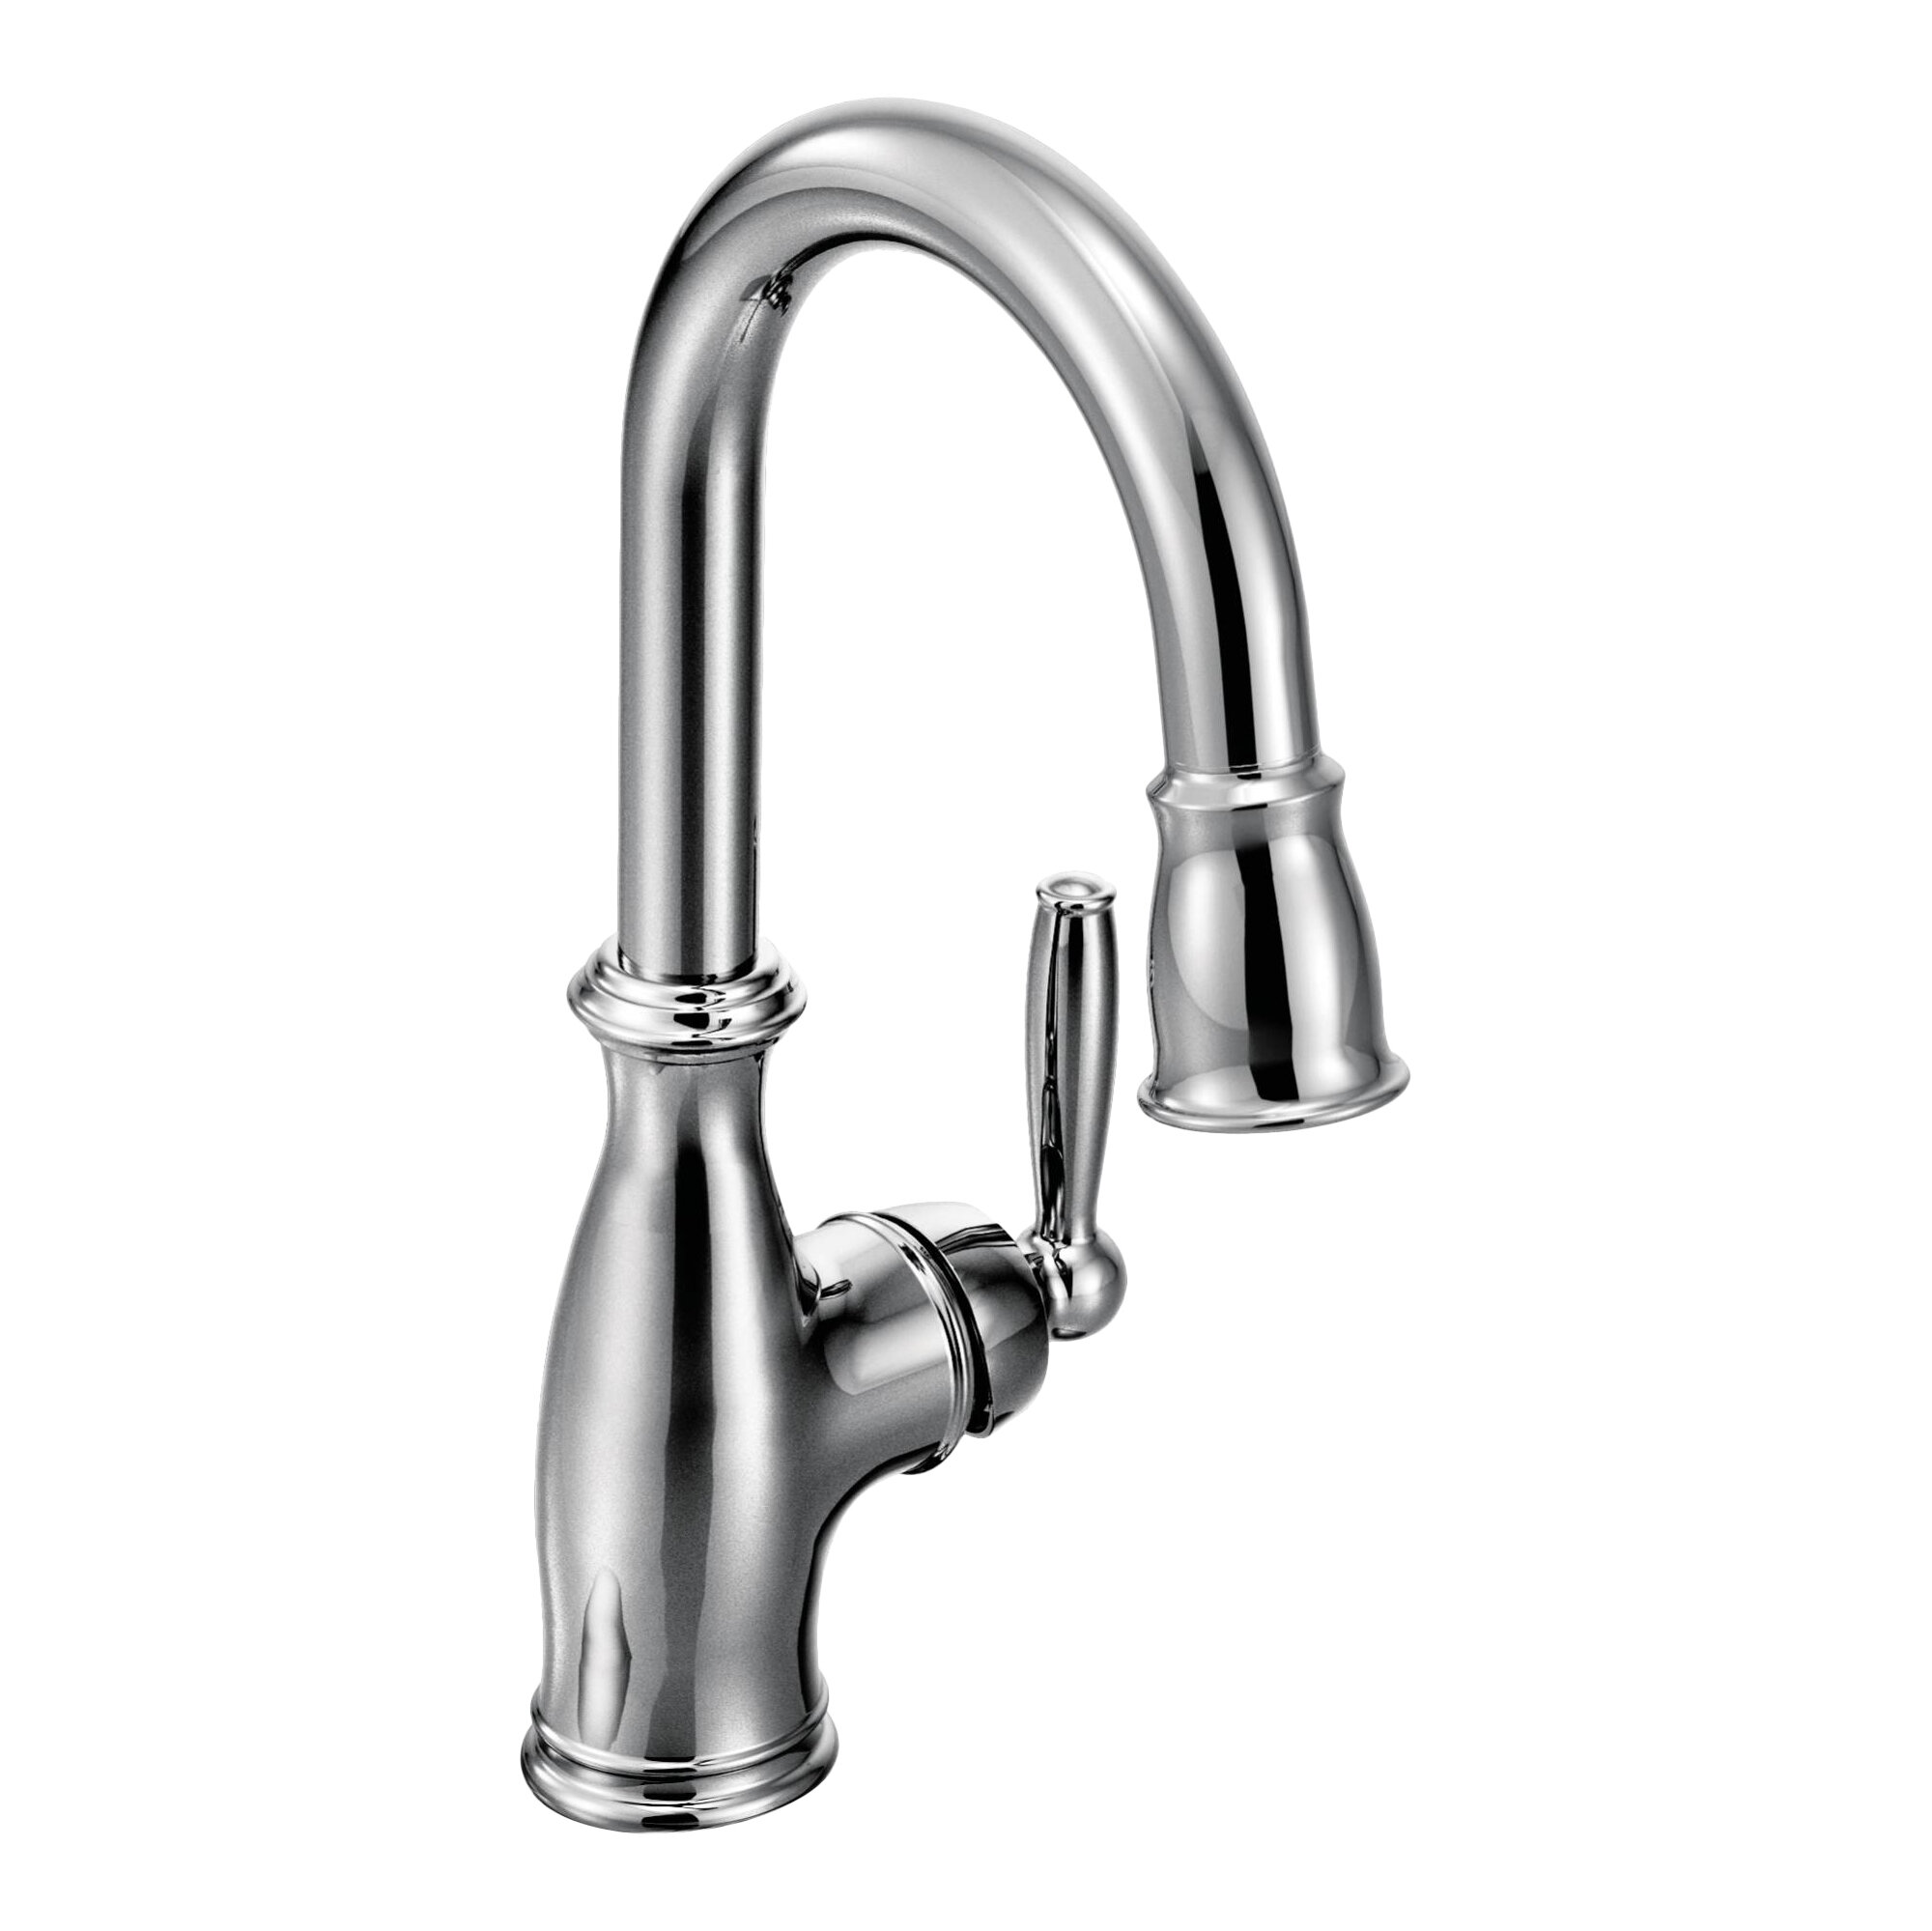 5985srs Orb Moen Brantford Pull Down Bar Faucet With Reflex And